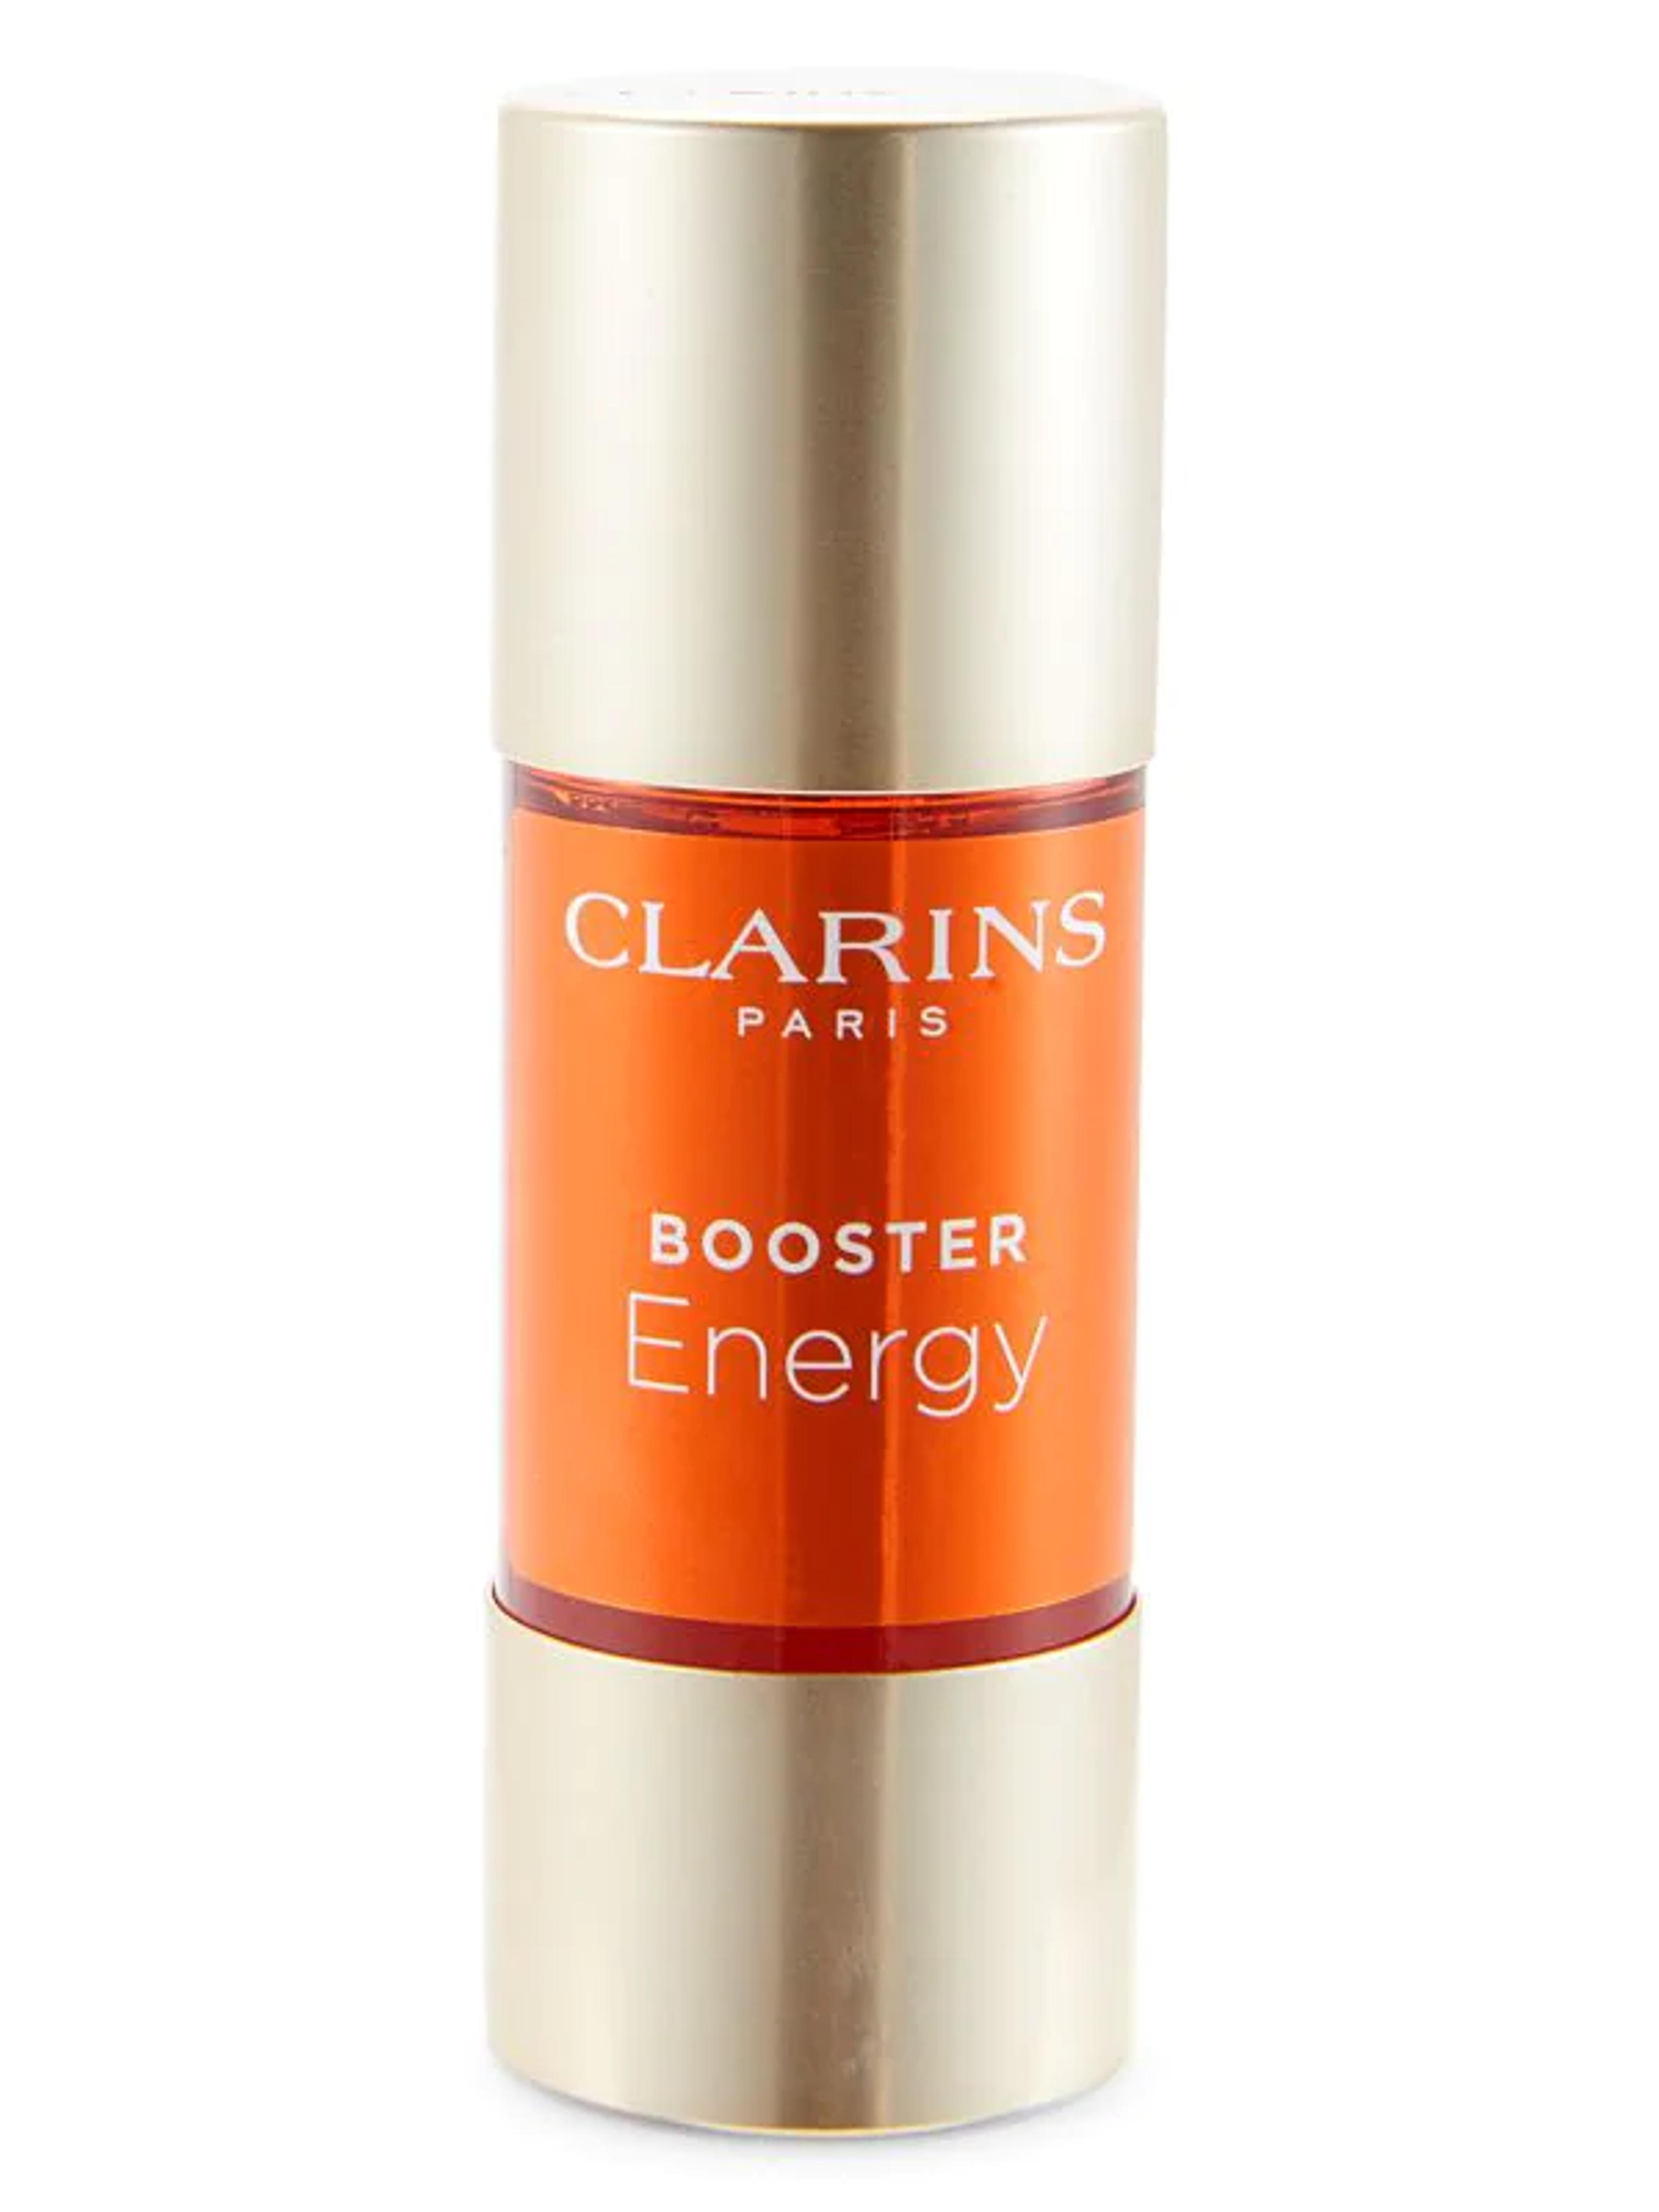 Clarins Booster Energy Cream on SALE | Saks OFF 5TH